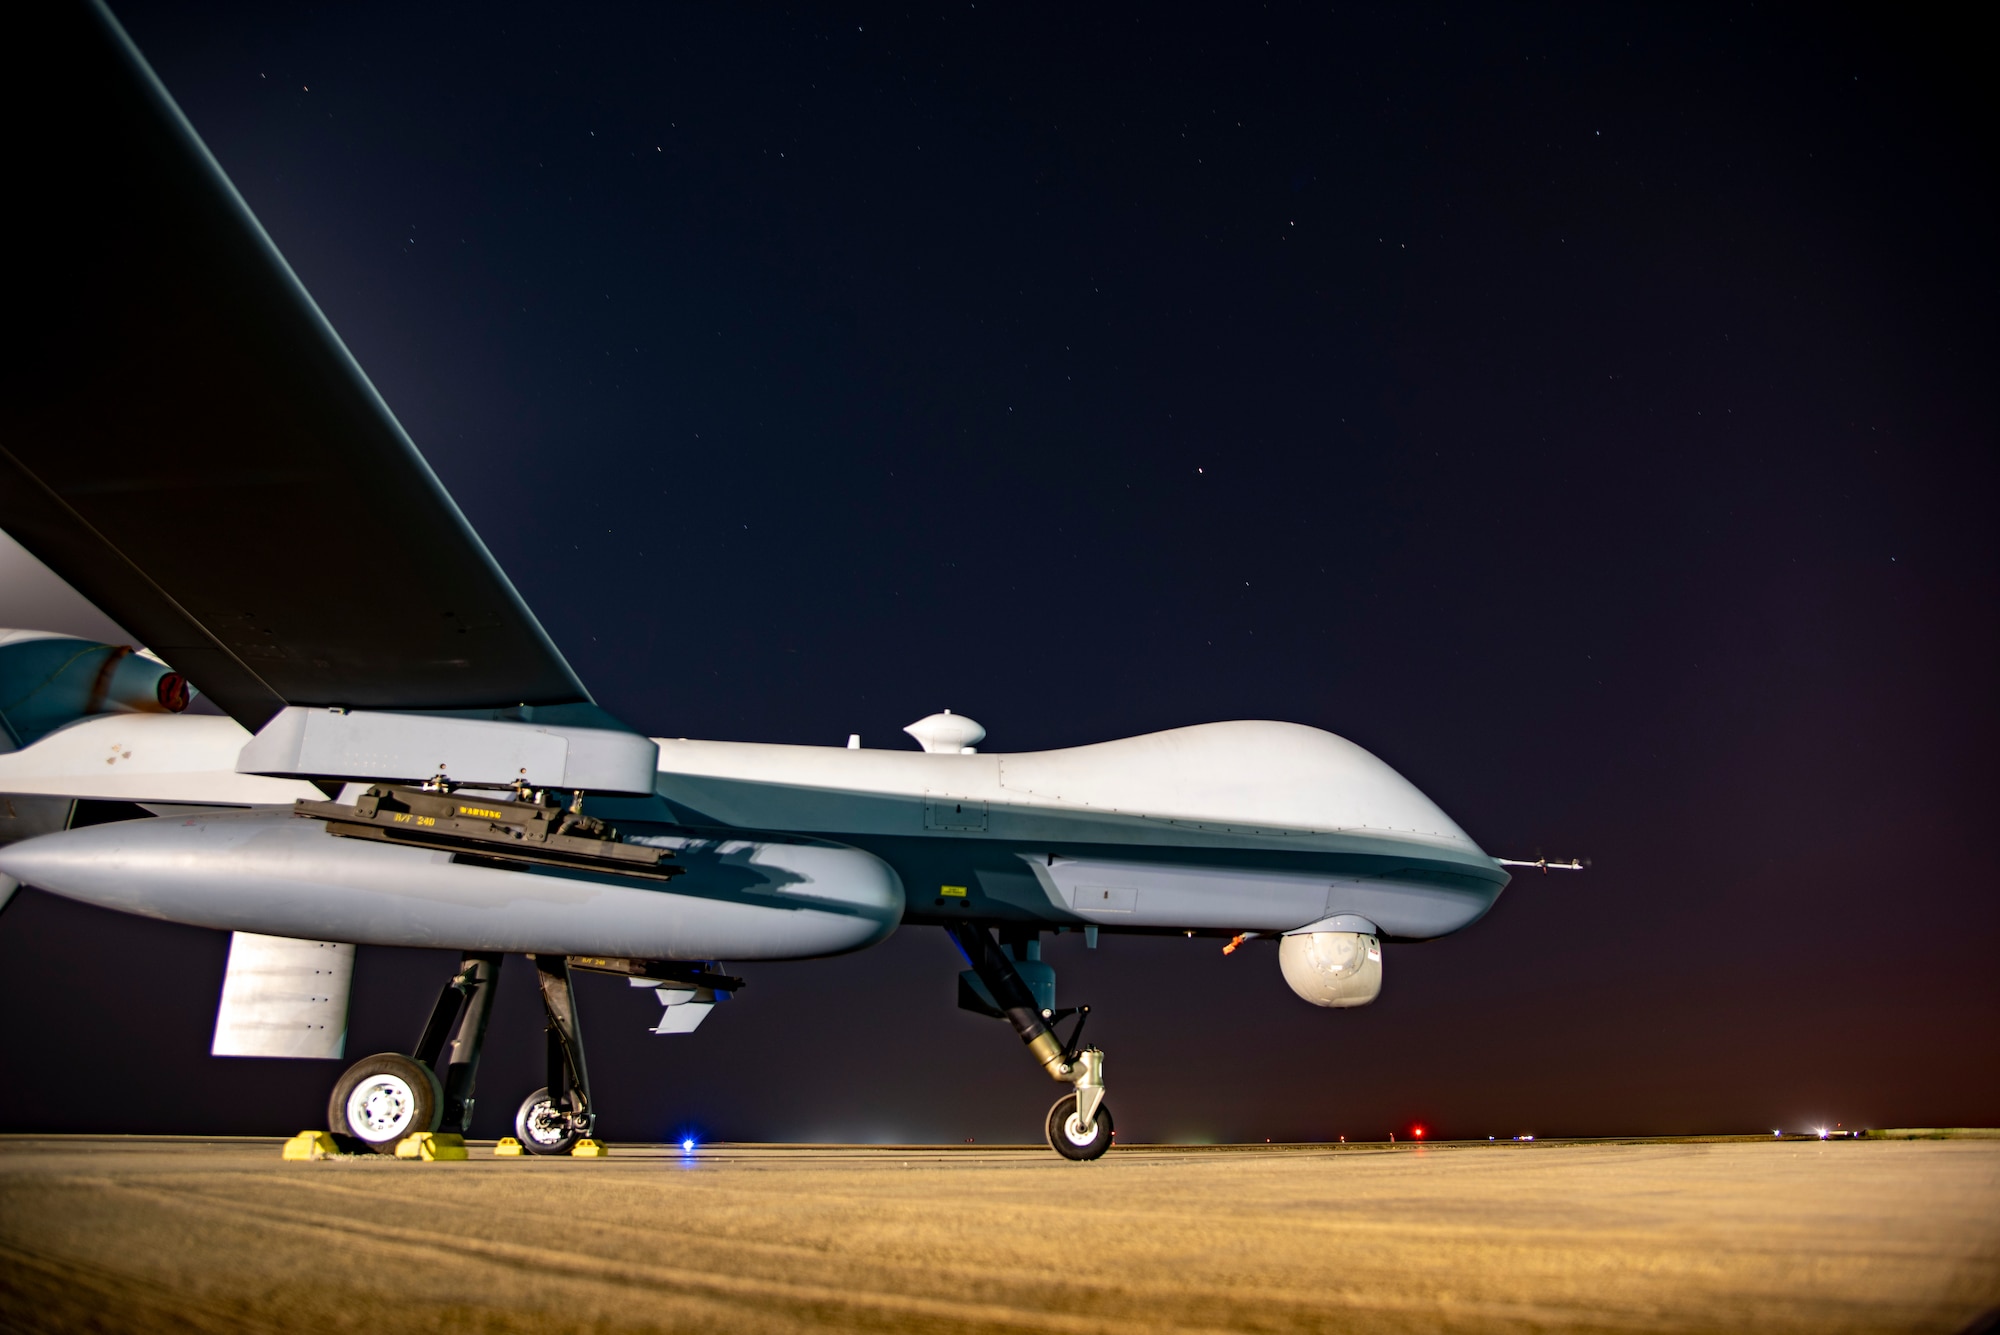 Long exposure photo of an MQ-9 Reaper on the 361 Expeditionary Attack Squadron flight line at an undisclosed location, August 6, 2022. The MQ-9 is an unmanned aircraft capable of remote controlled or autonomous flight. The 361 EAS operates them in support of Operation Inherent Resolve. (U.S. Air Force photo by: Tech. Sgt. Jim Bentley)